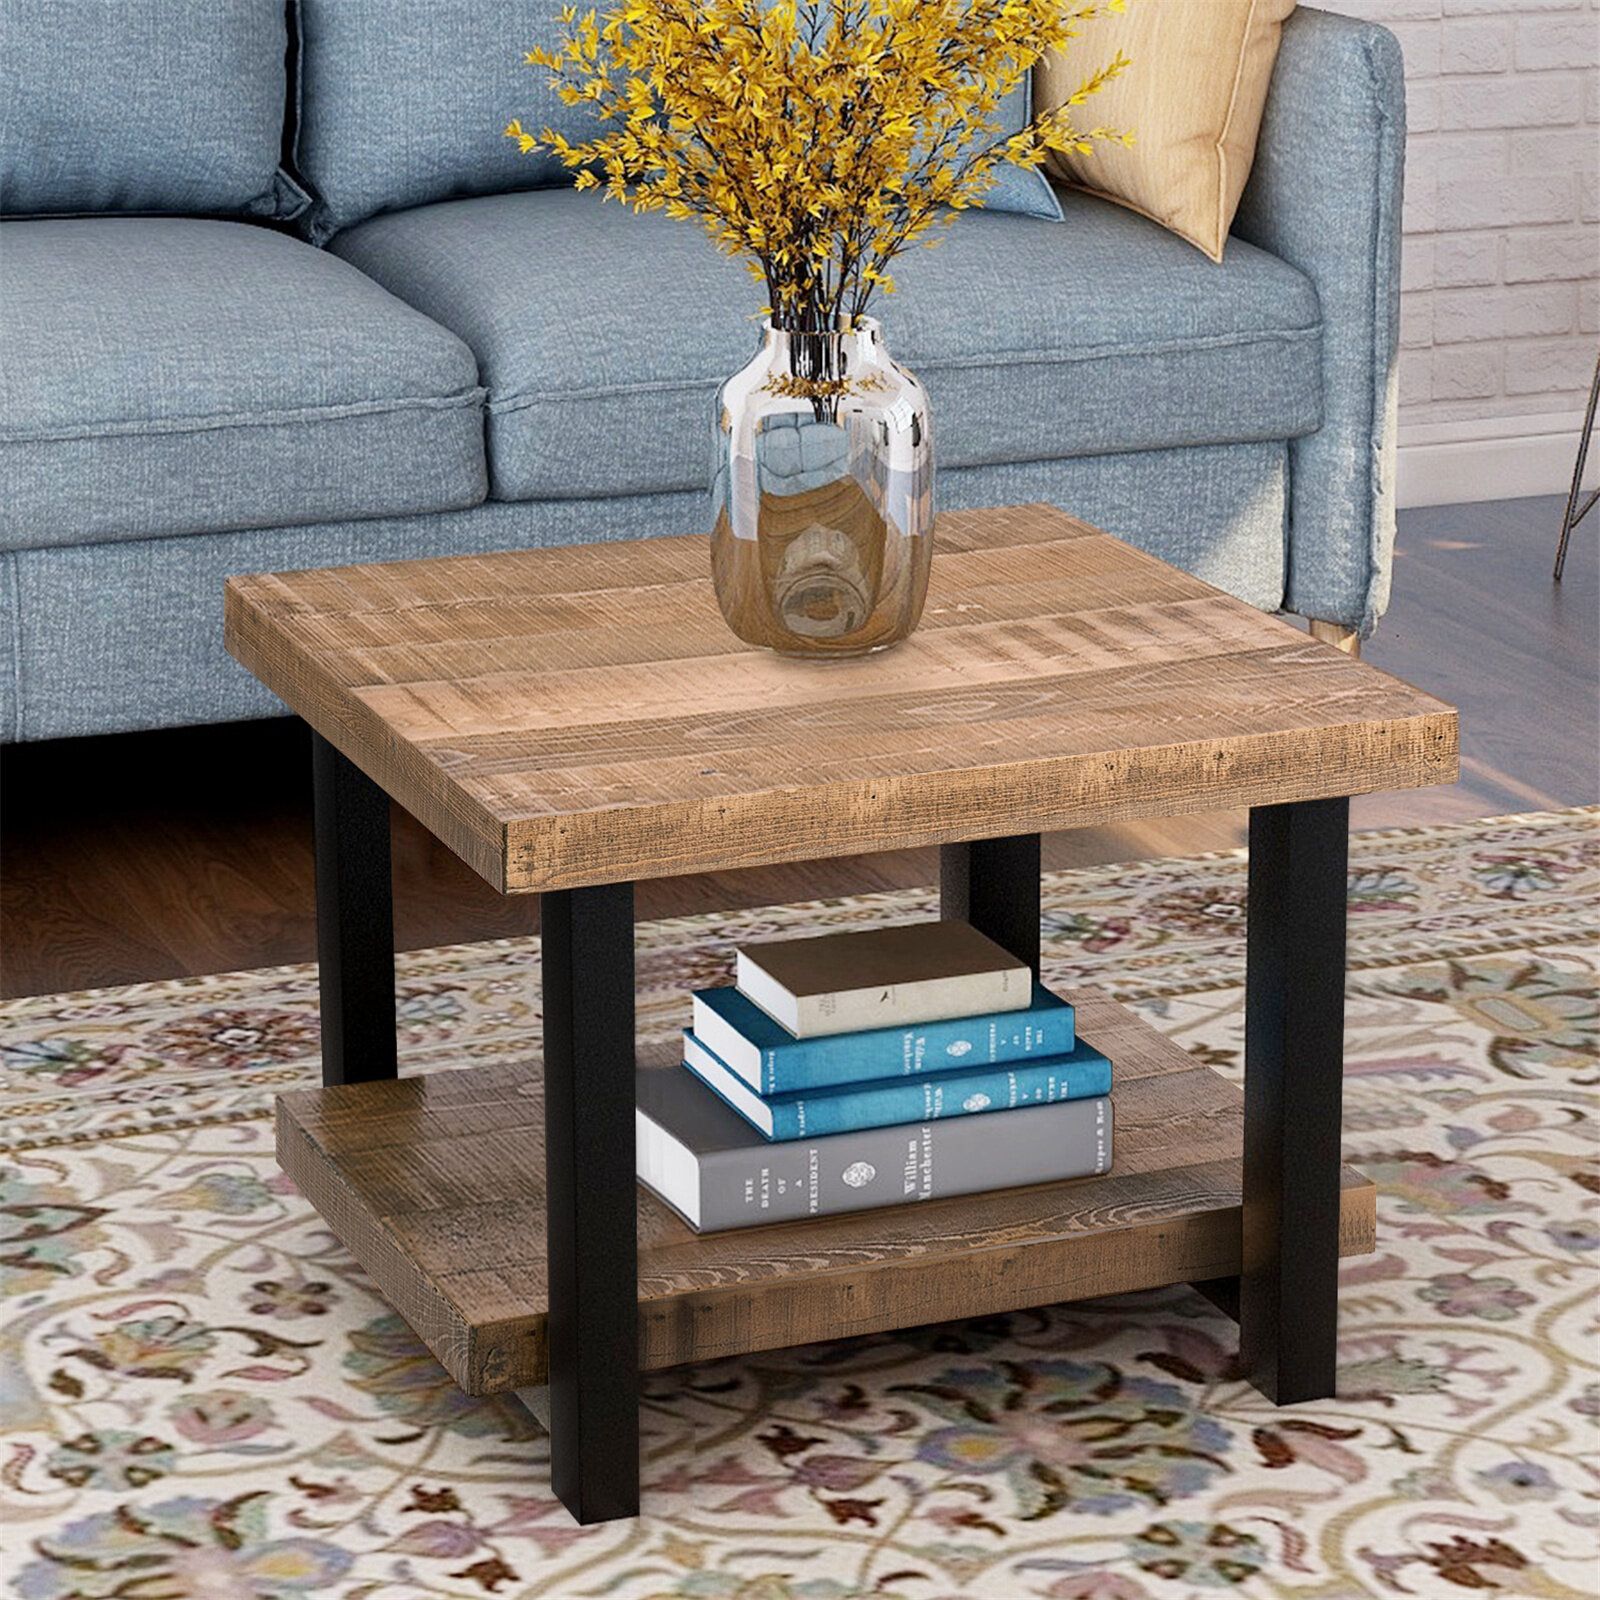 Millwood Pines Rustic Natural Coffee Table With Storage Shelf For Living  Room | Wayfair Intended For Rustic Natural Coffee Tables (View 7 of 20)